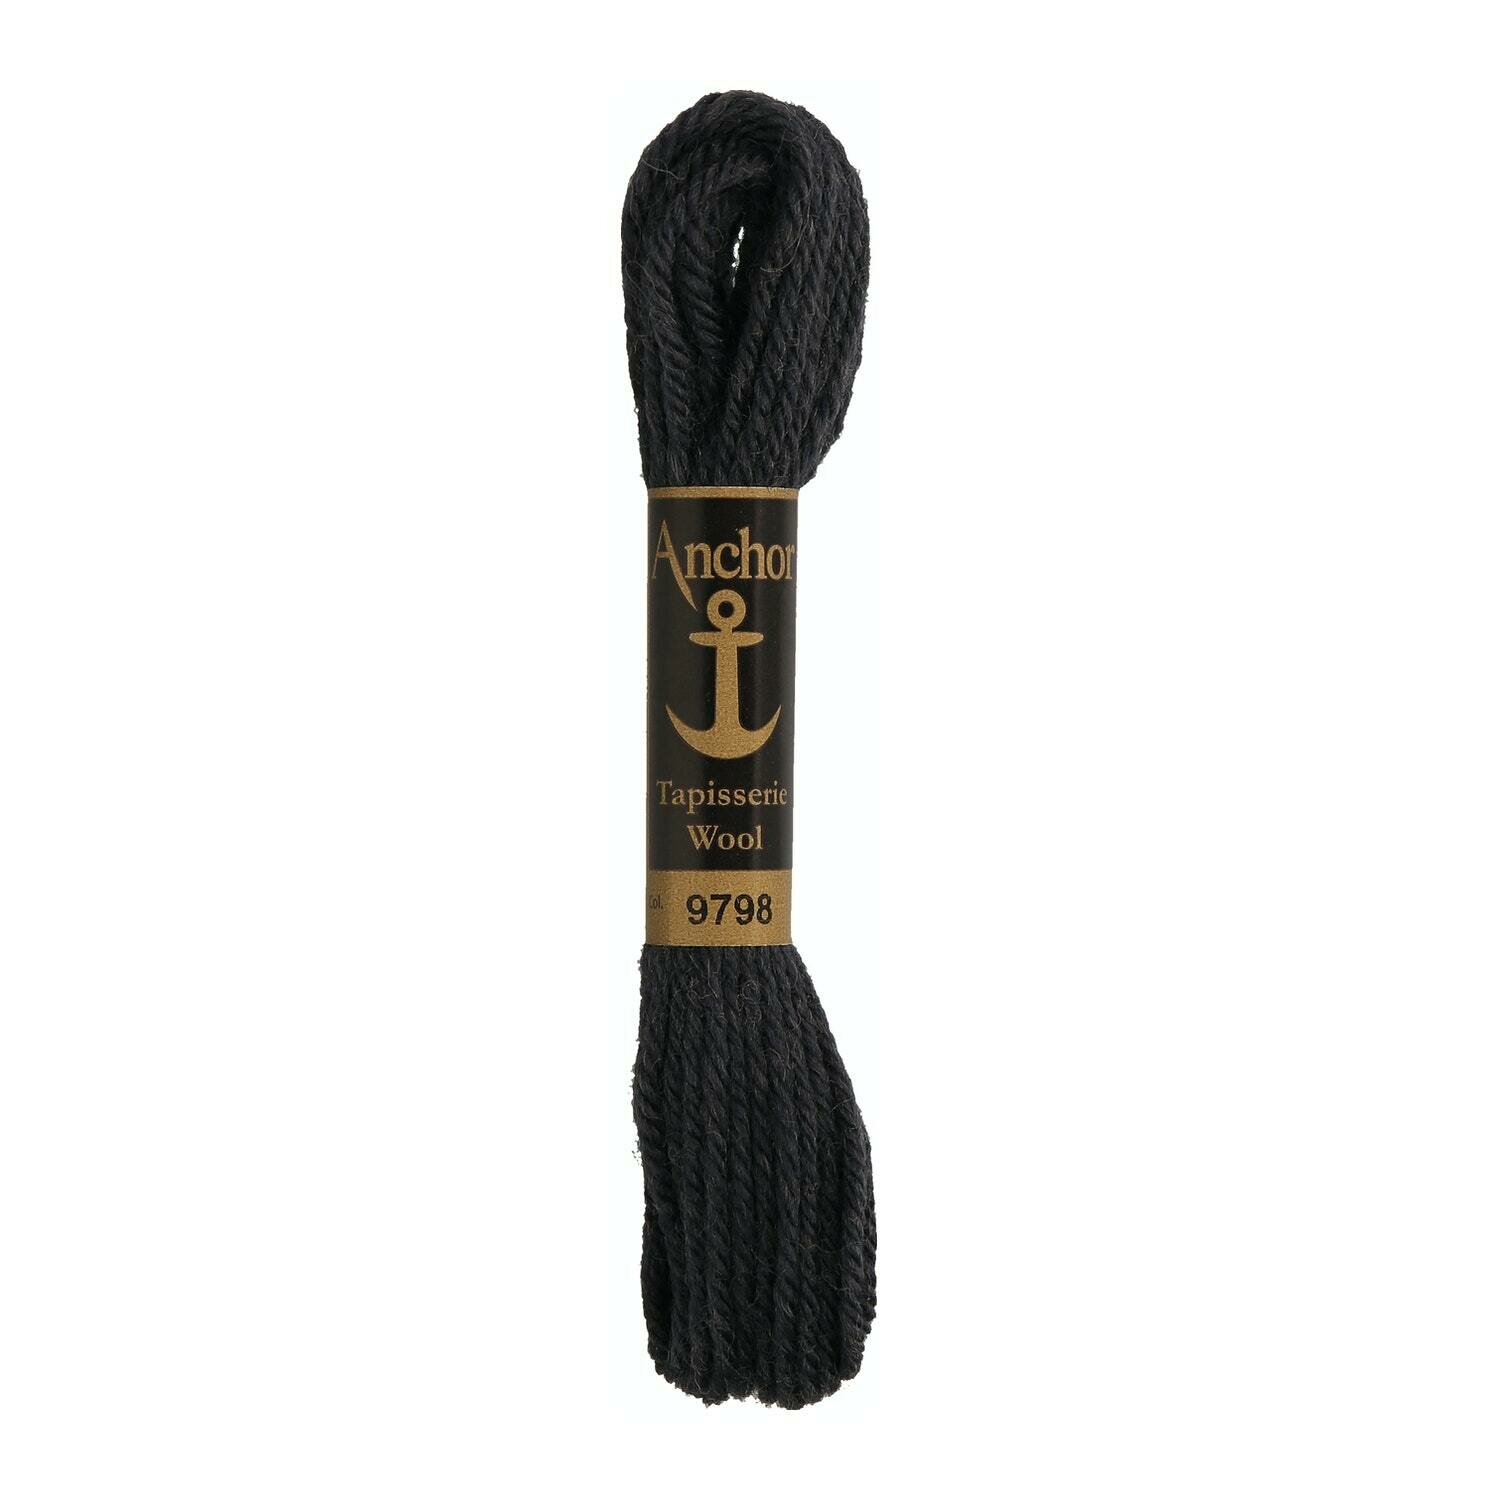 Anchor Tapisserie Wool # 09798